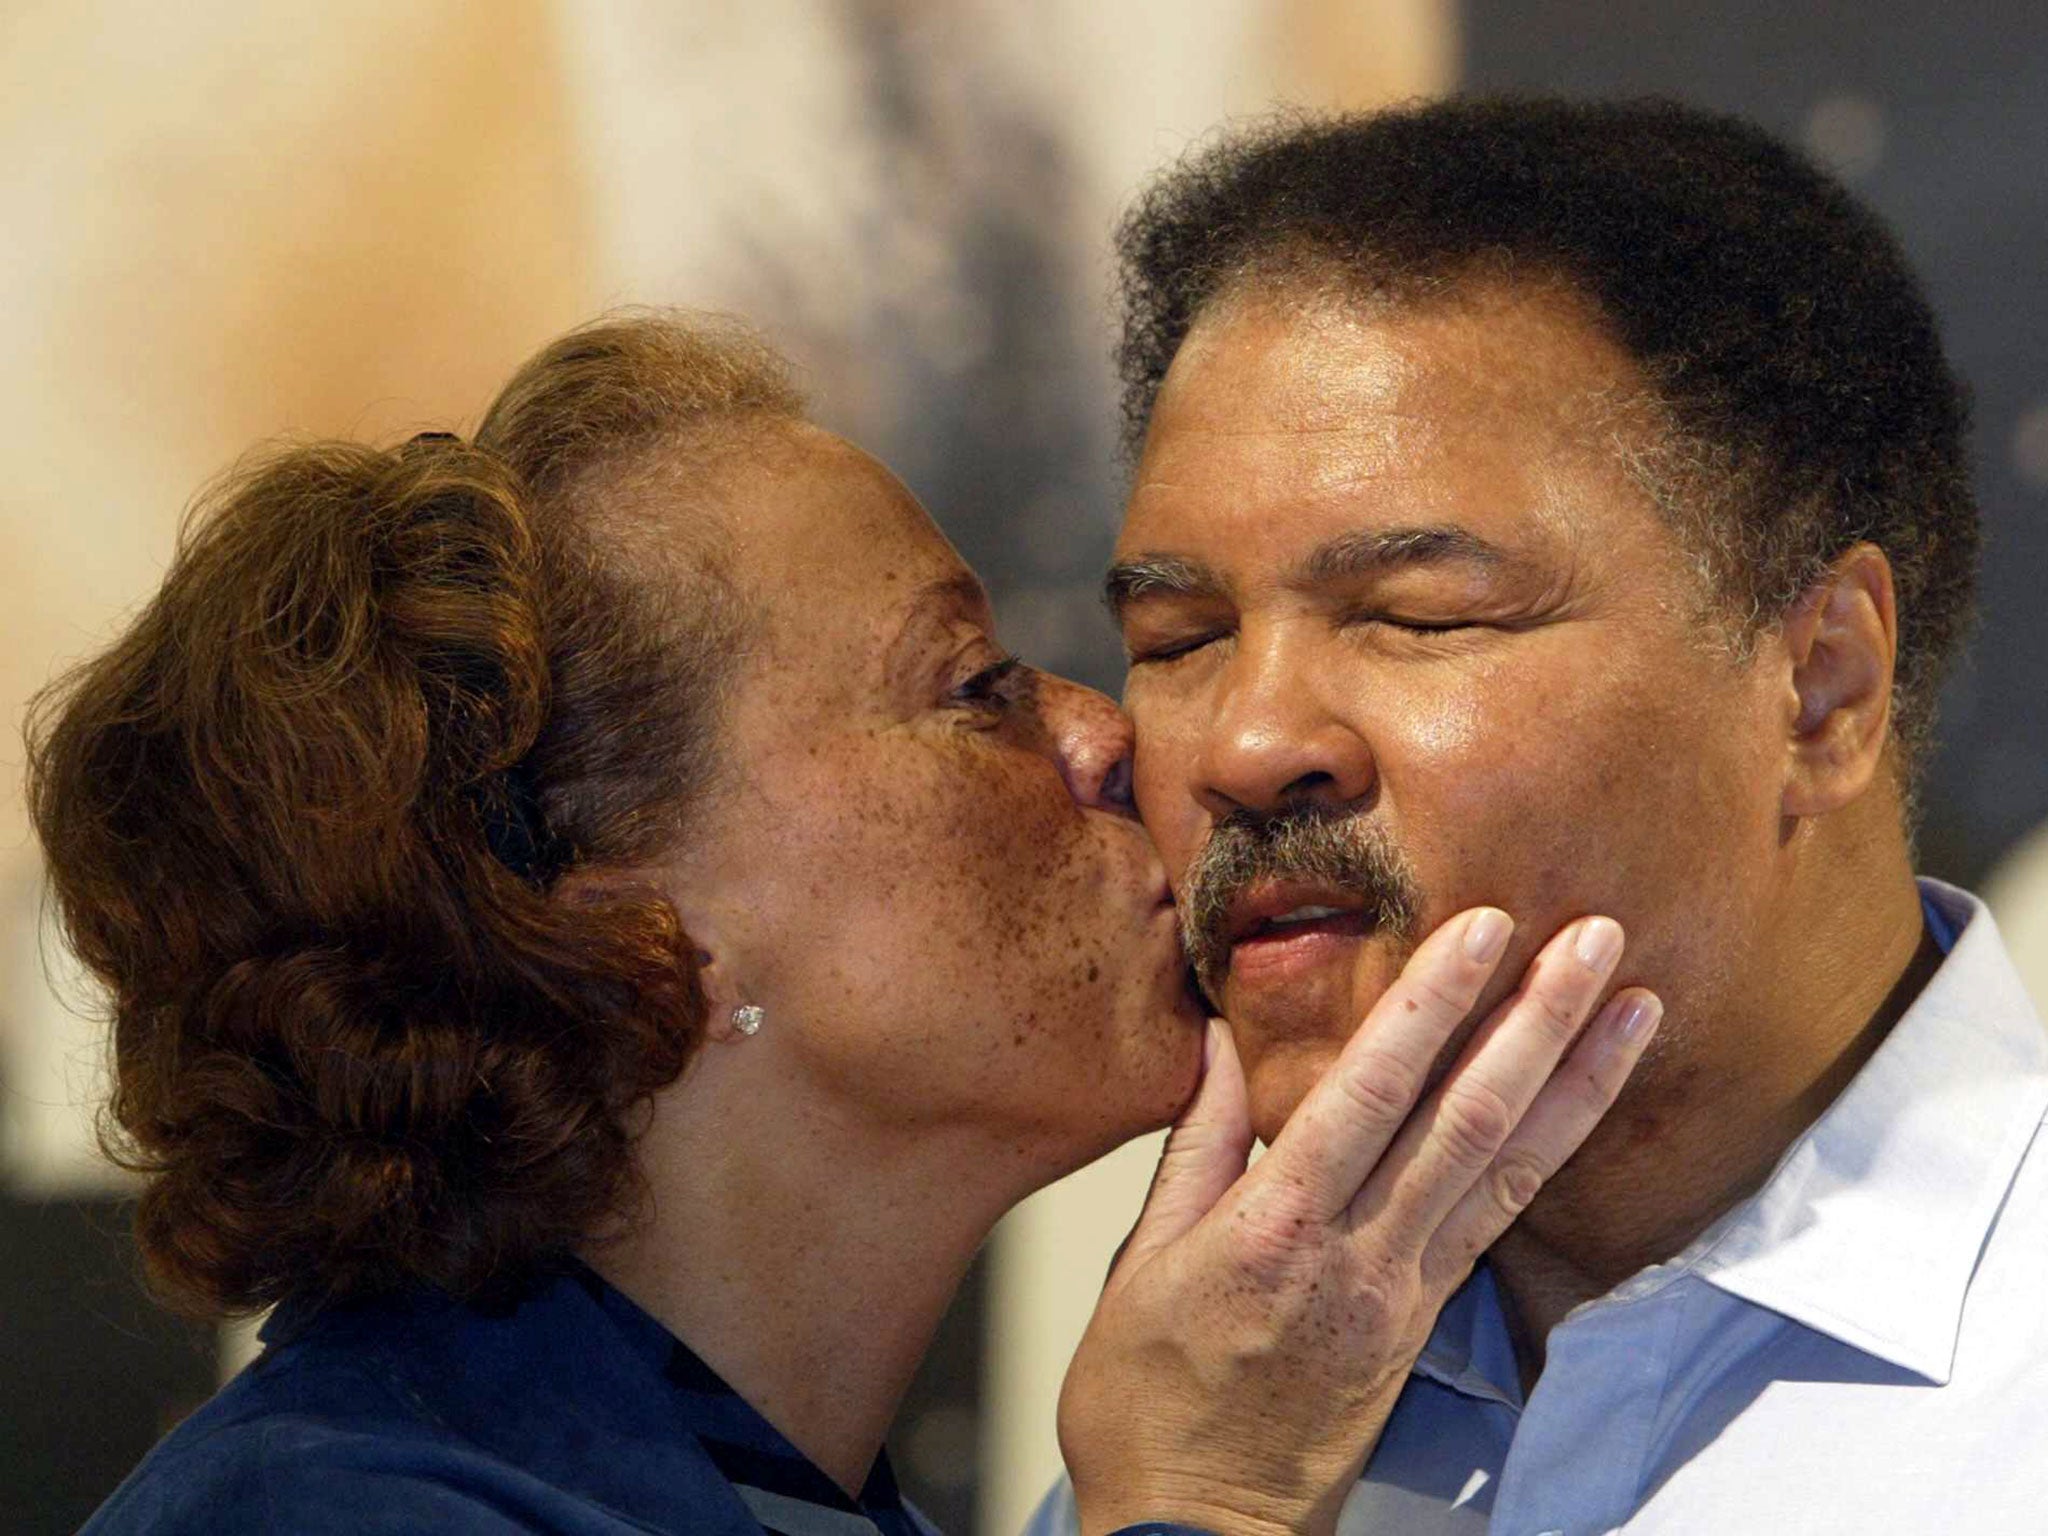 Muhammad Ali receives a kiss from his wife Lonnie during a presentation of his book 'Greatest of All Time' at the Frankfurt Book Fair in 2003